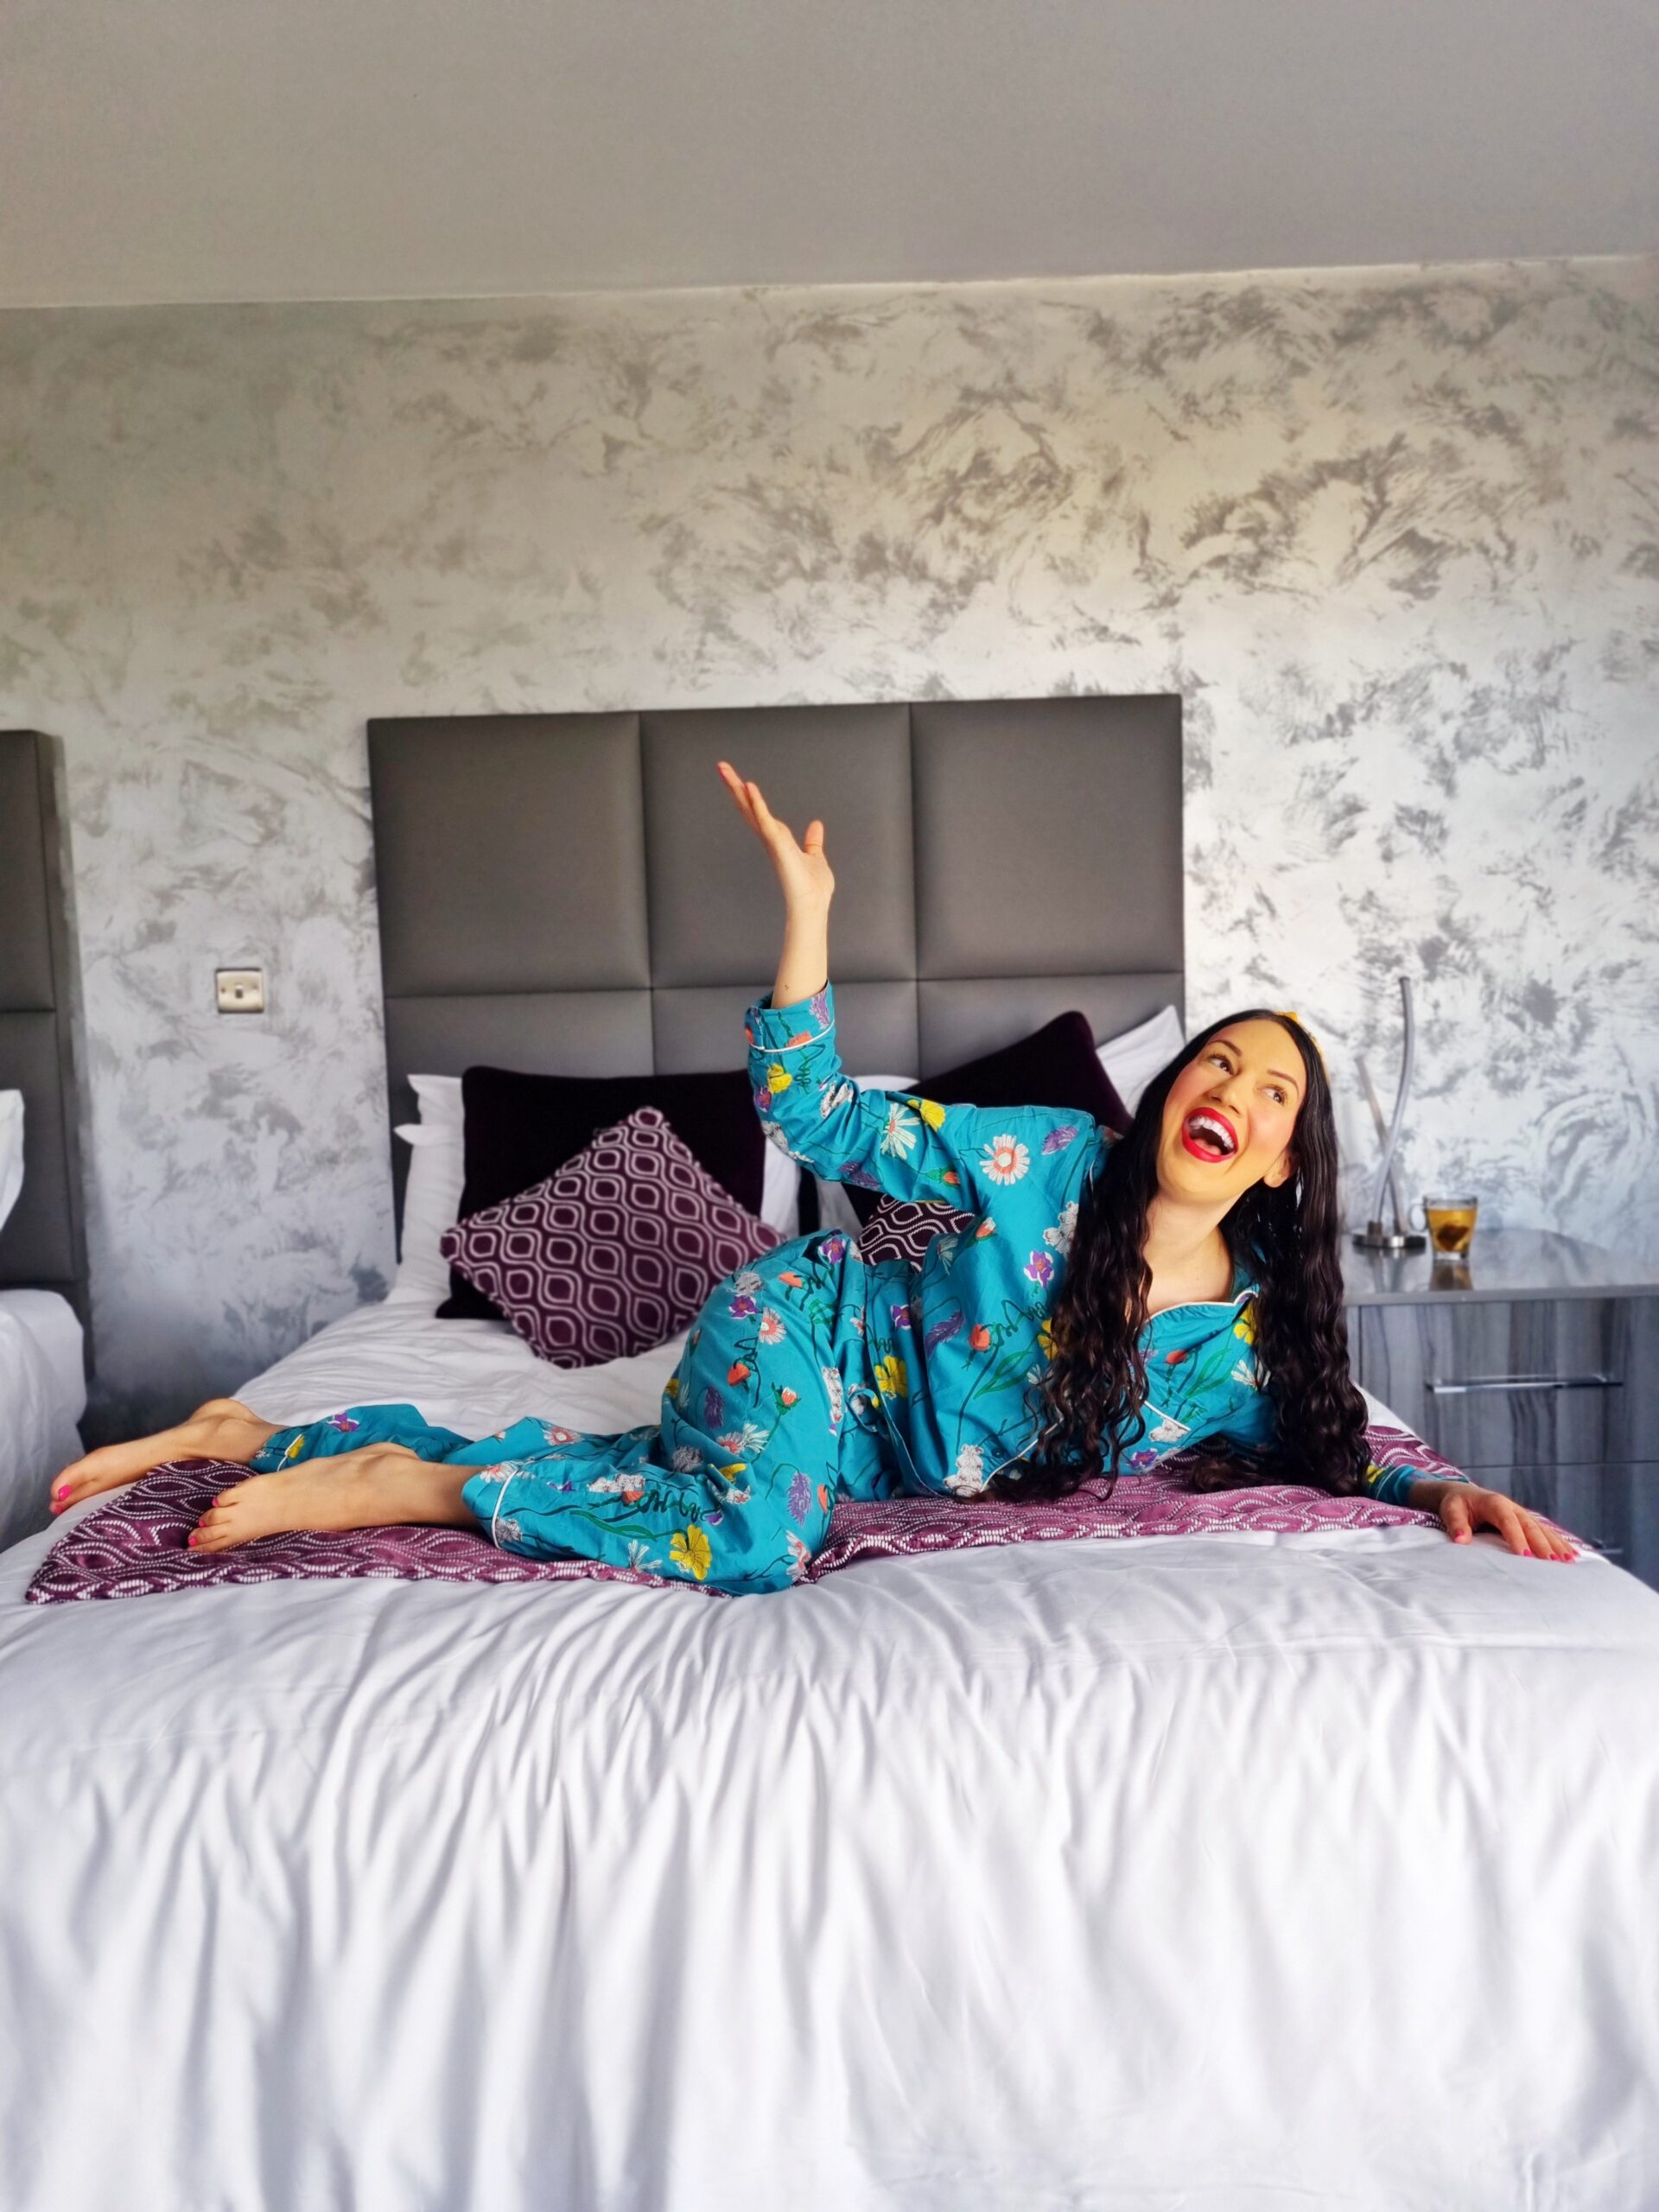 <img src="ana.jpg" alt="ana laughing on the bed in pjs"/>